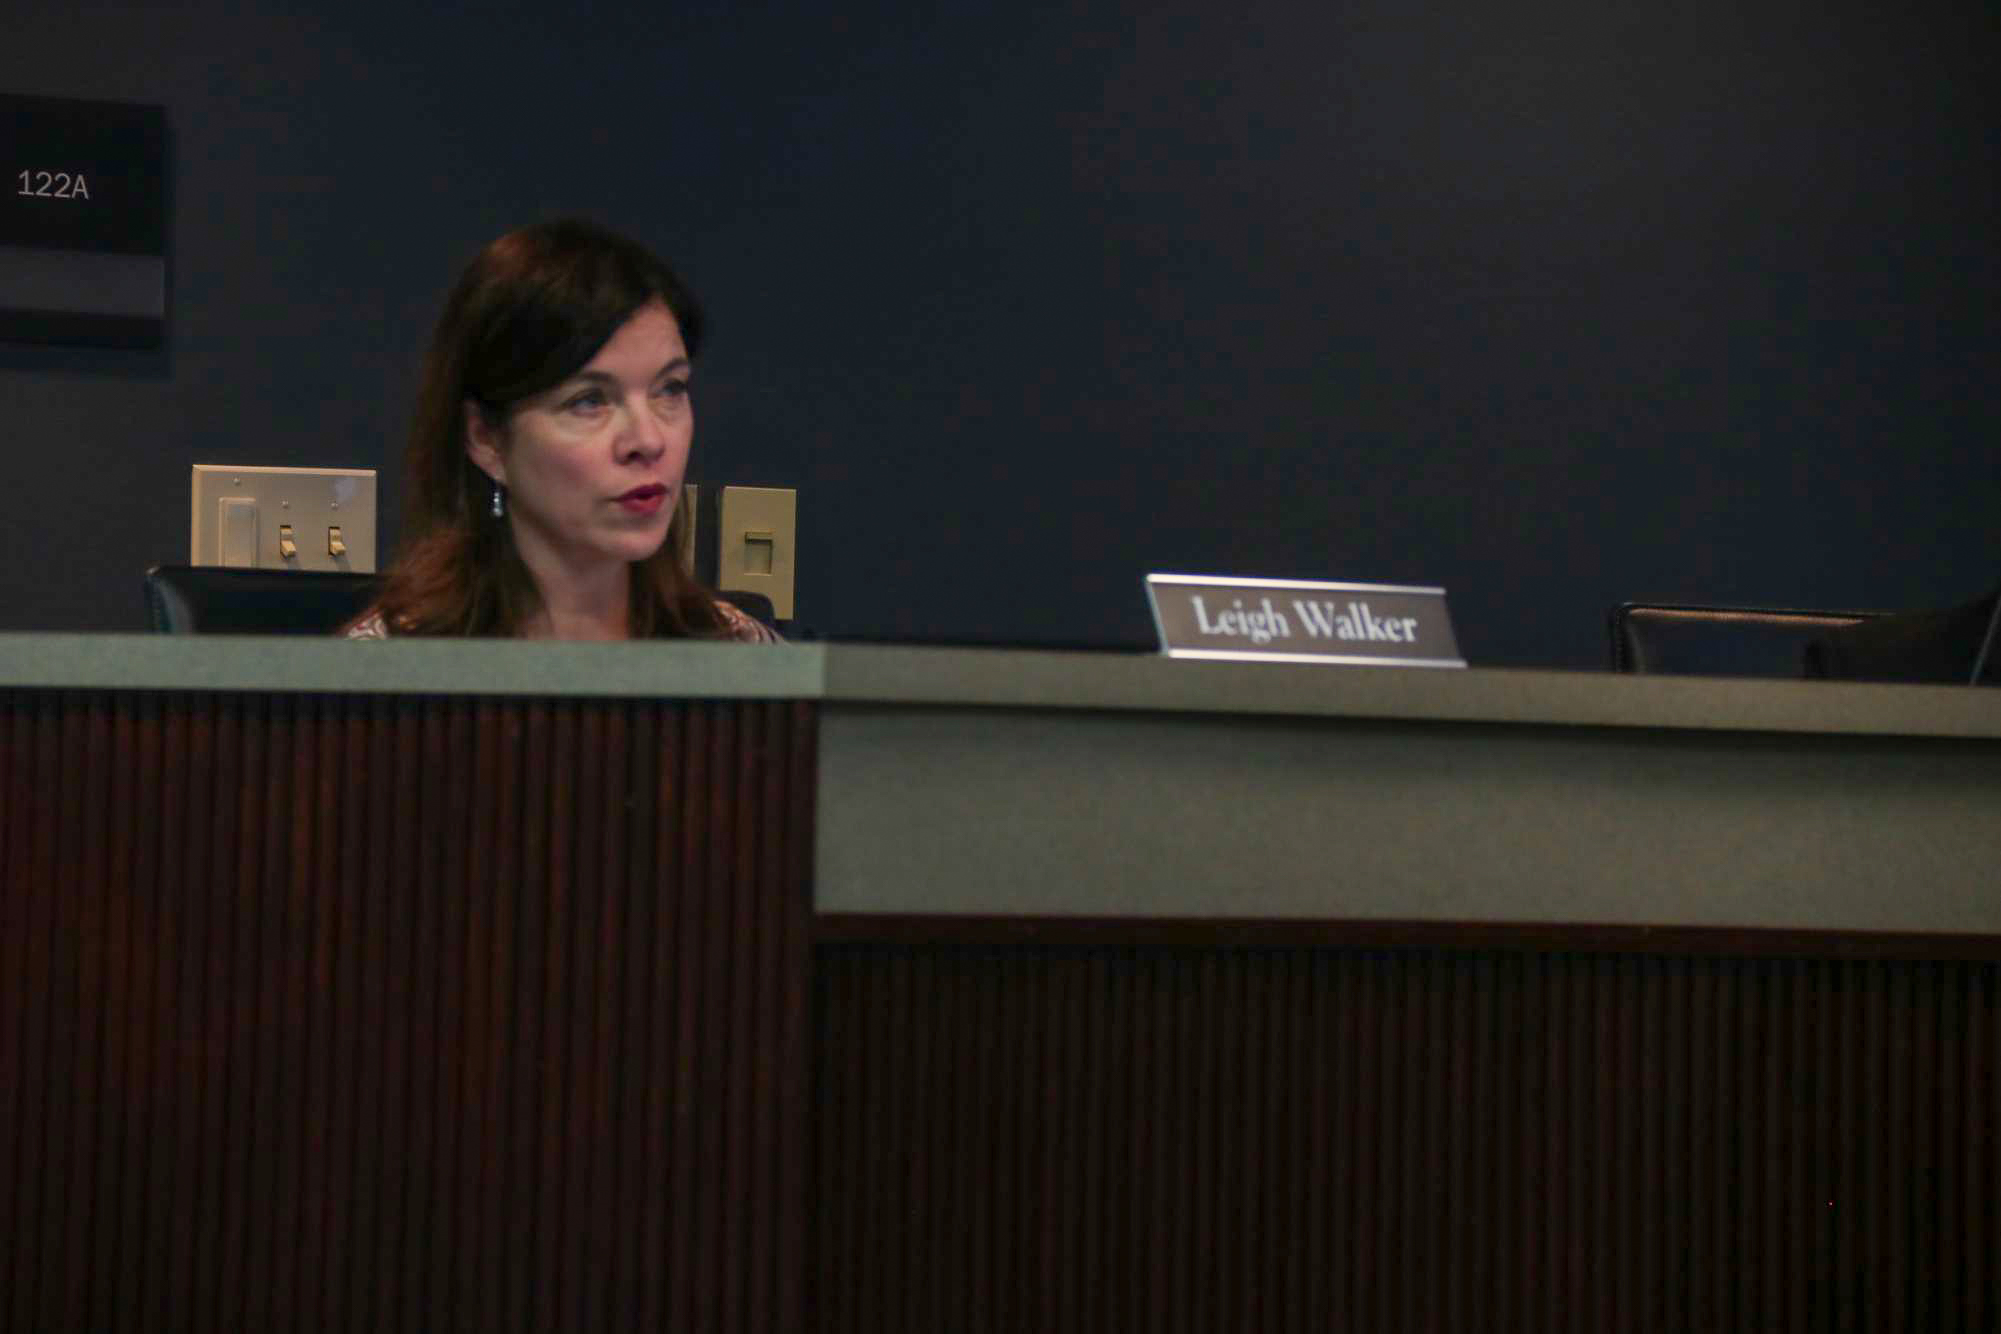 Coppell ISD Board trustee Leigh Walker discusses district updates at a meeting Monday in the Vonita White Administration Building. The board talked about future plans on campus modernizations, mental health programs, and district funding.